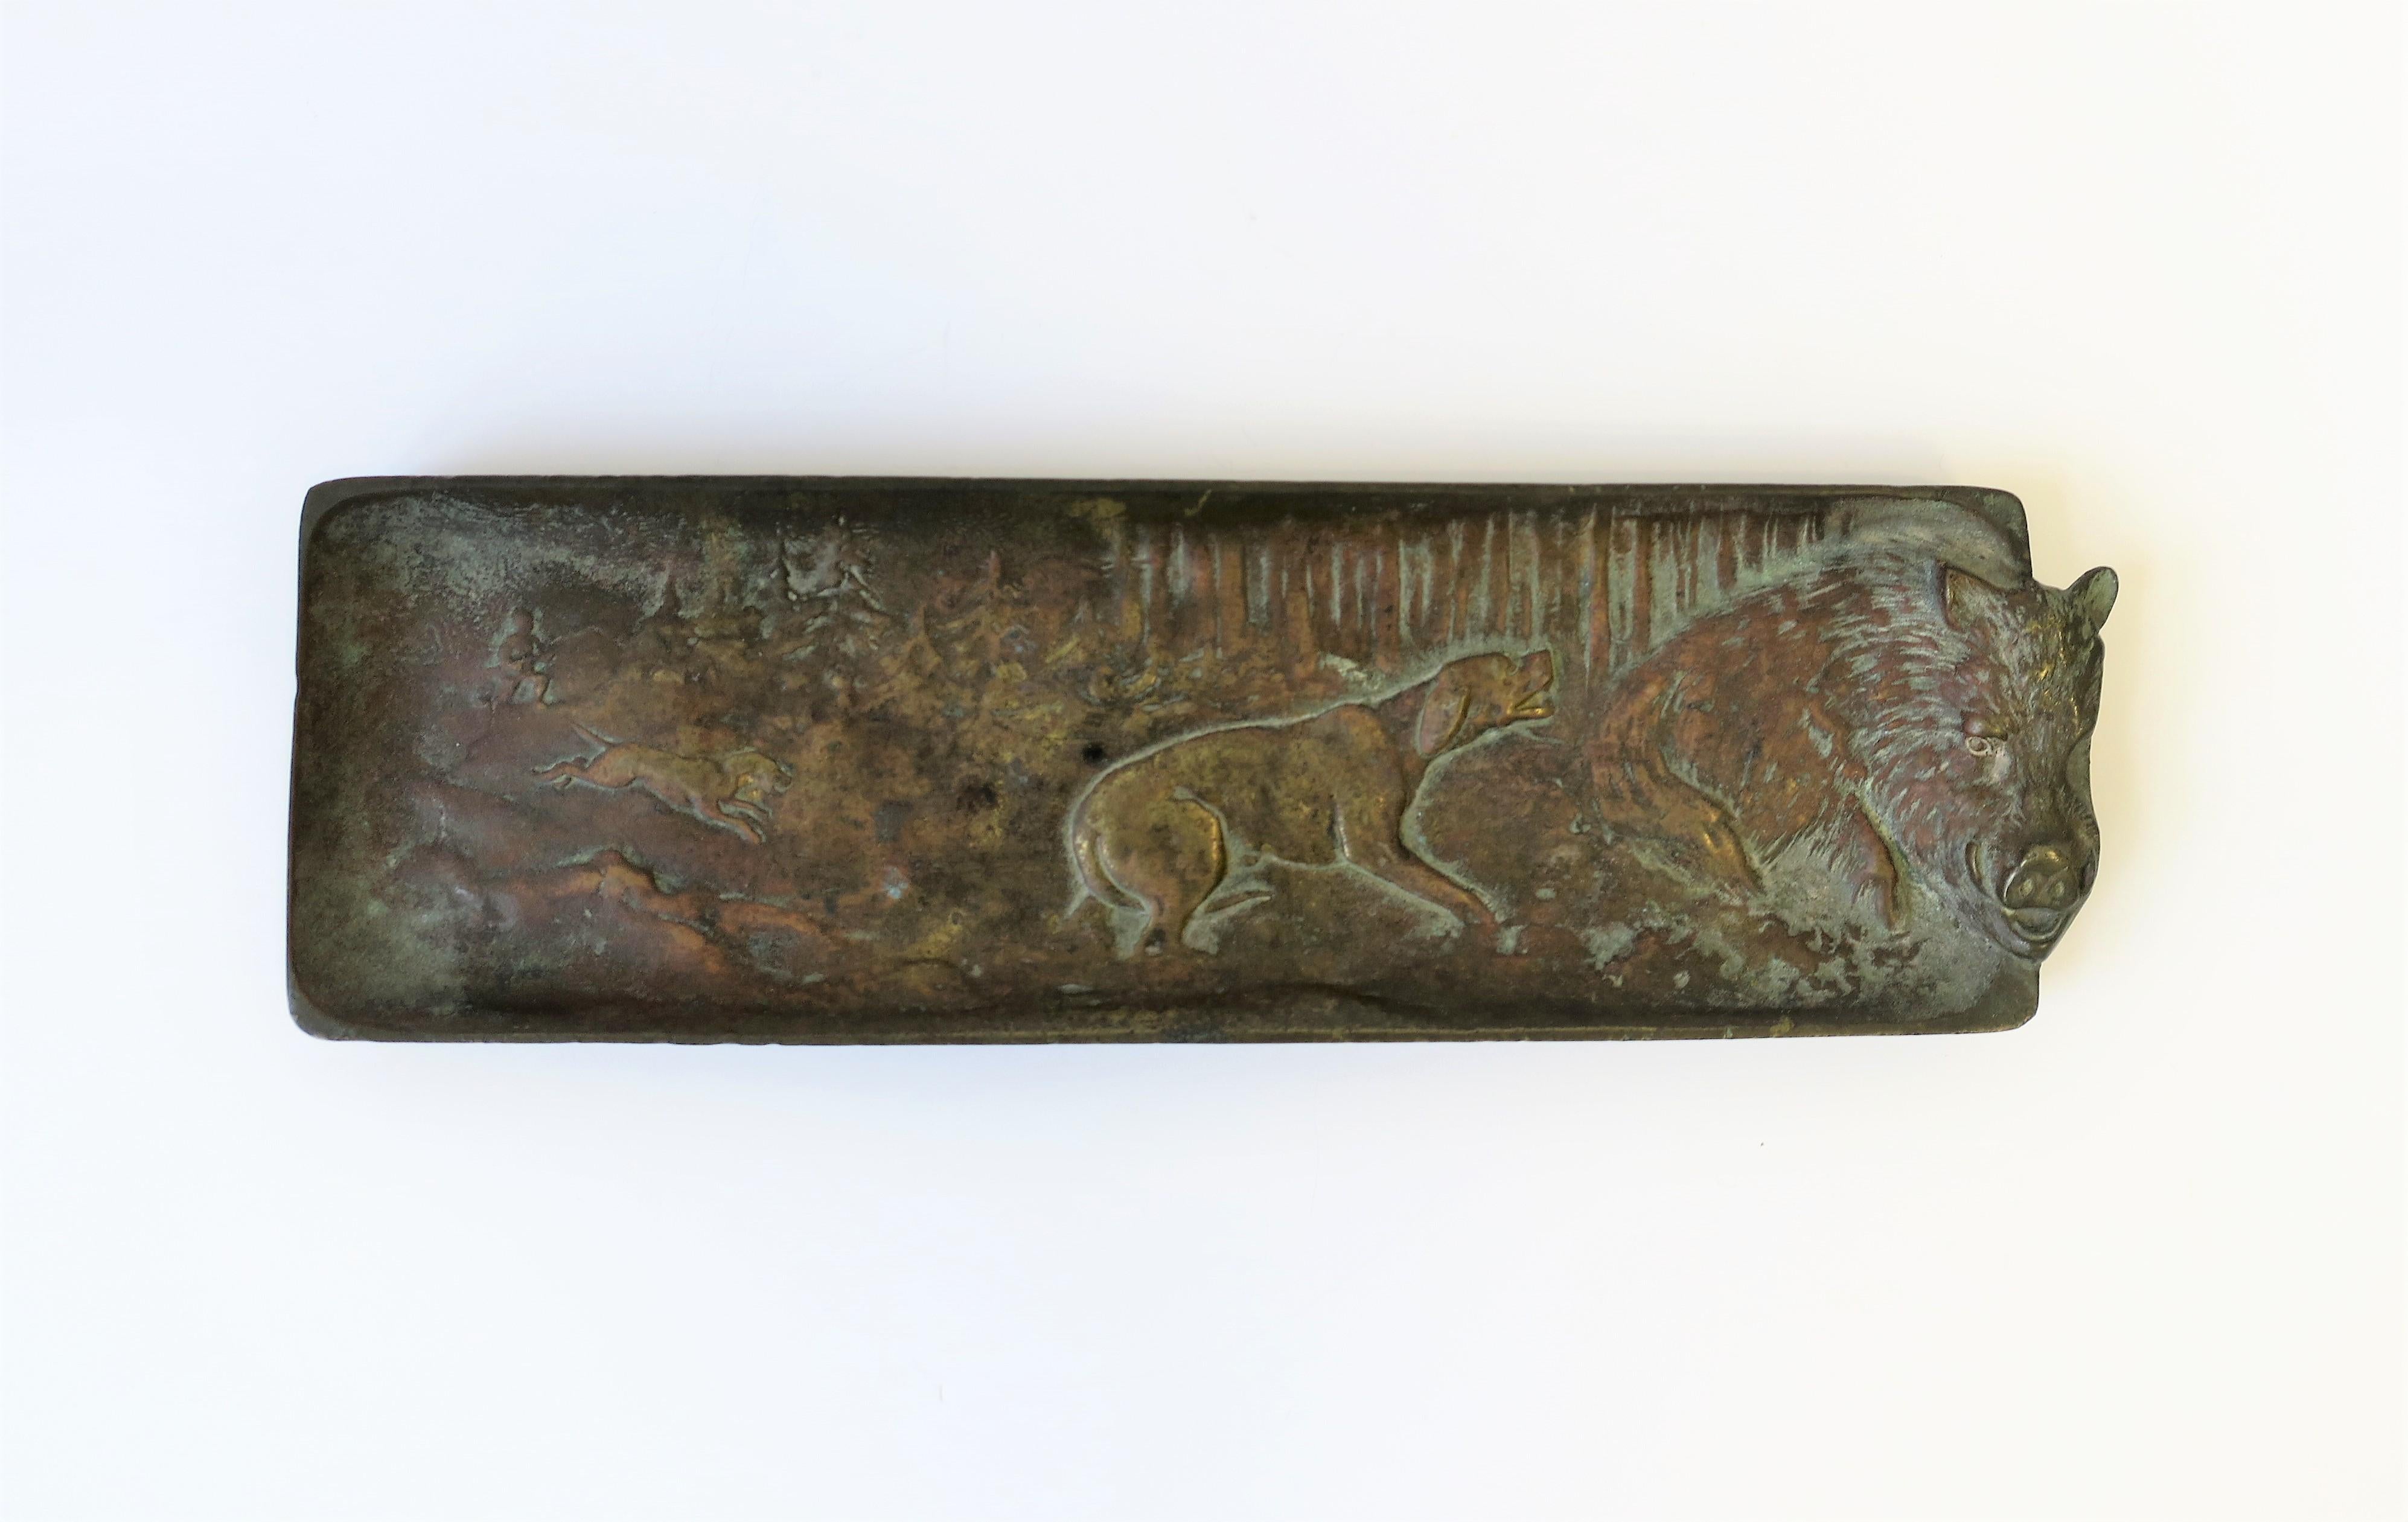 A substantial bronze rectangular tray with raised relief design depicting a 'hunting scene in woods', circa early-20th century. Detailed raised relief scene includes tall pine trees, hunter man, blood hound and retriever dog, and a wild boar. A